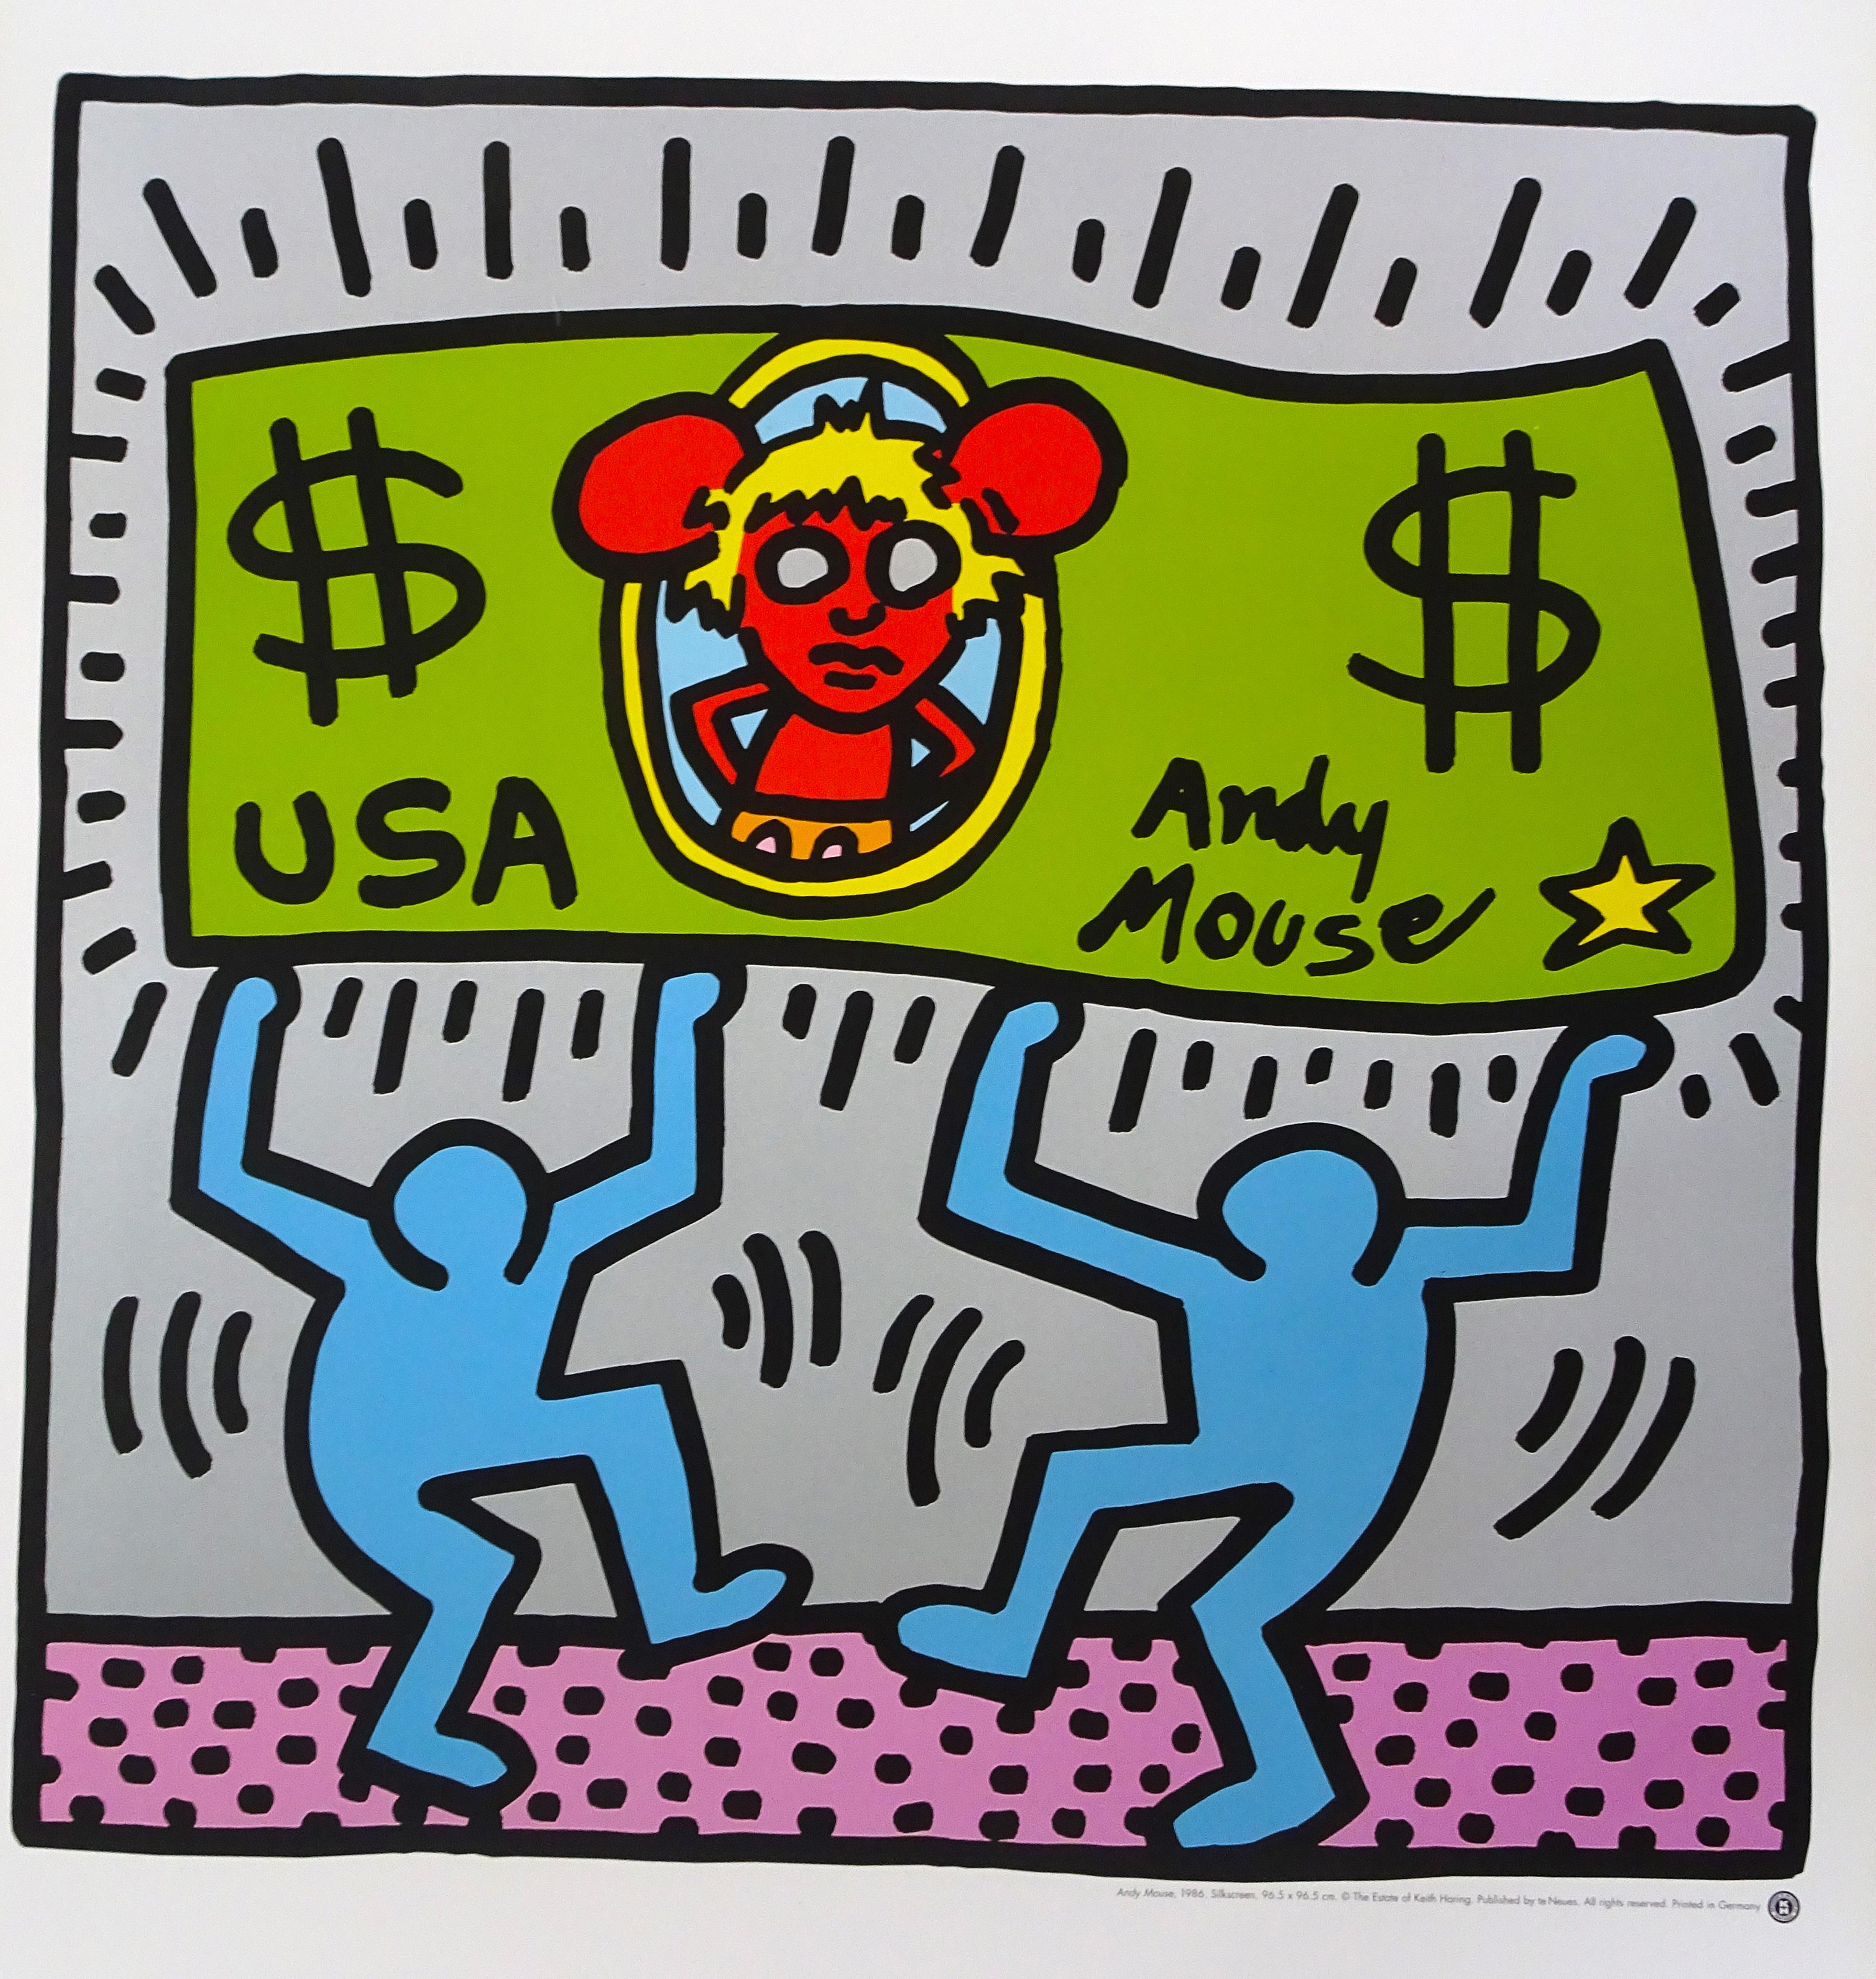 Andy Mouse is a beautiful offset print realized by Keith Haring in 1986.

Silkscreen. Published by Te Neues. Printed in Germany. Perfect conditions.